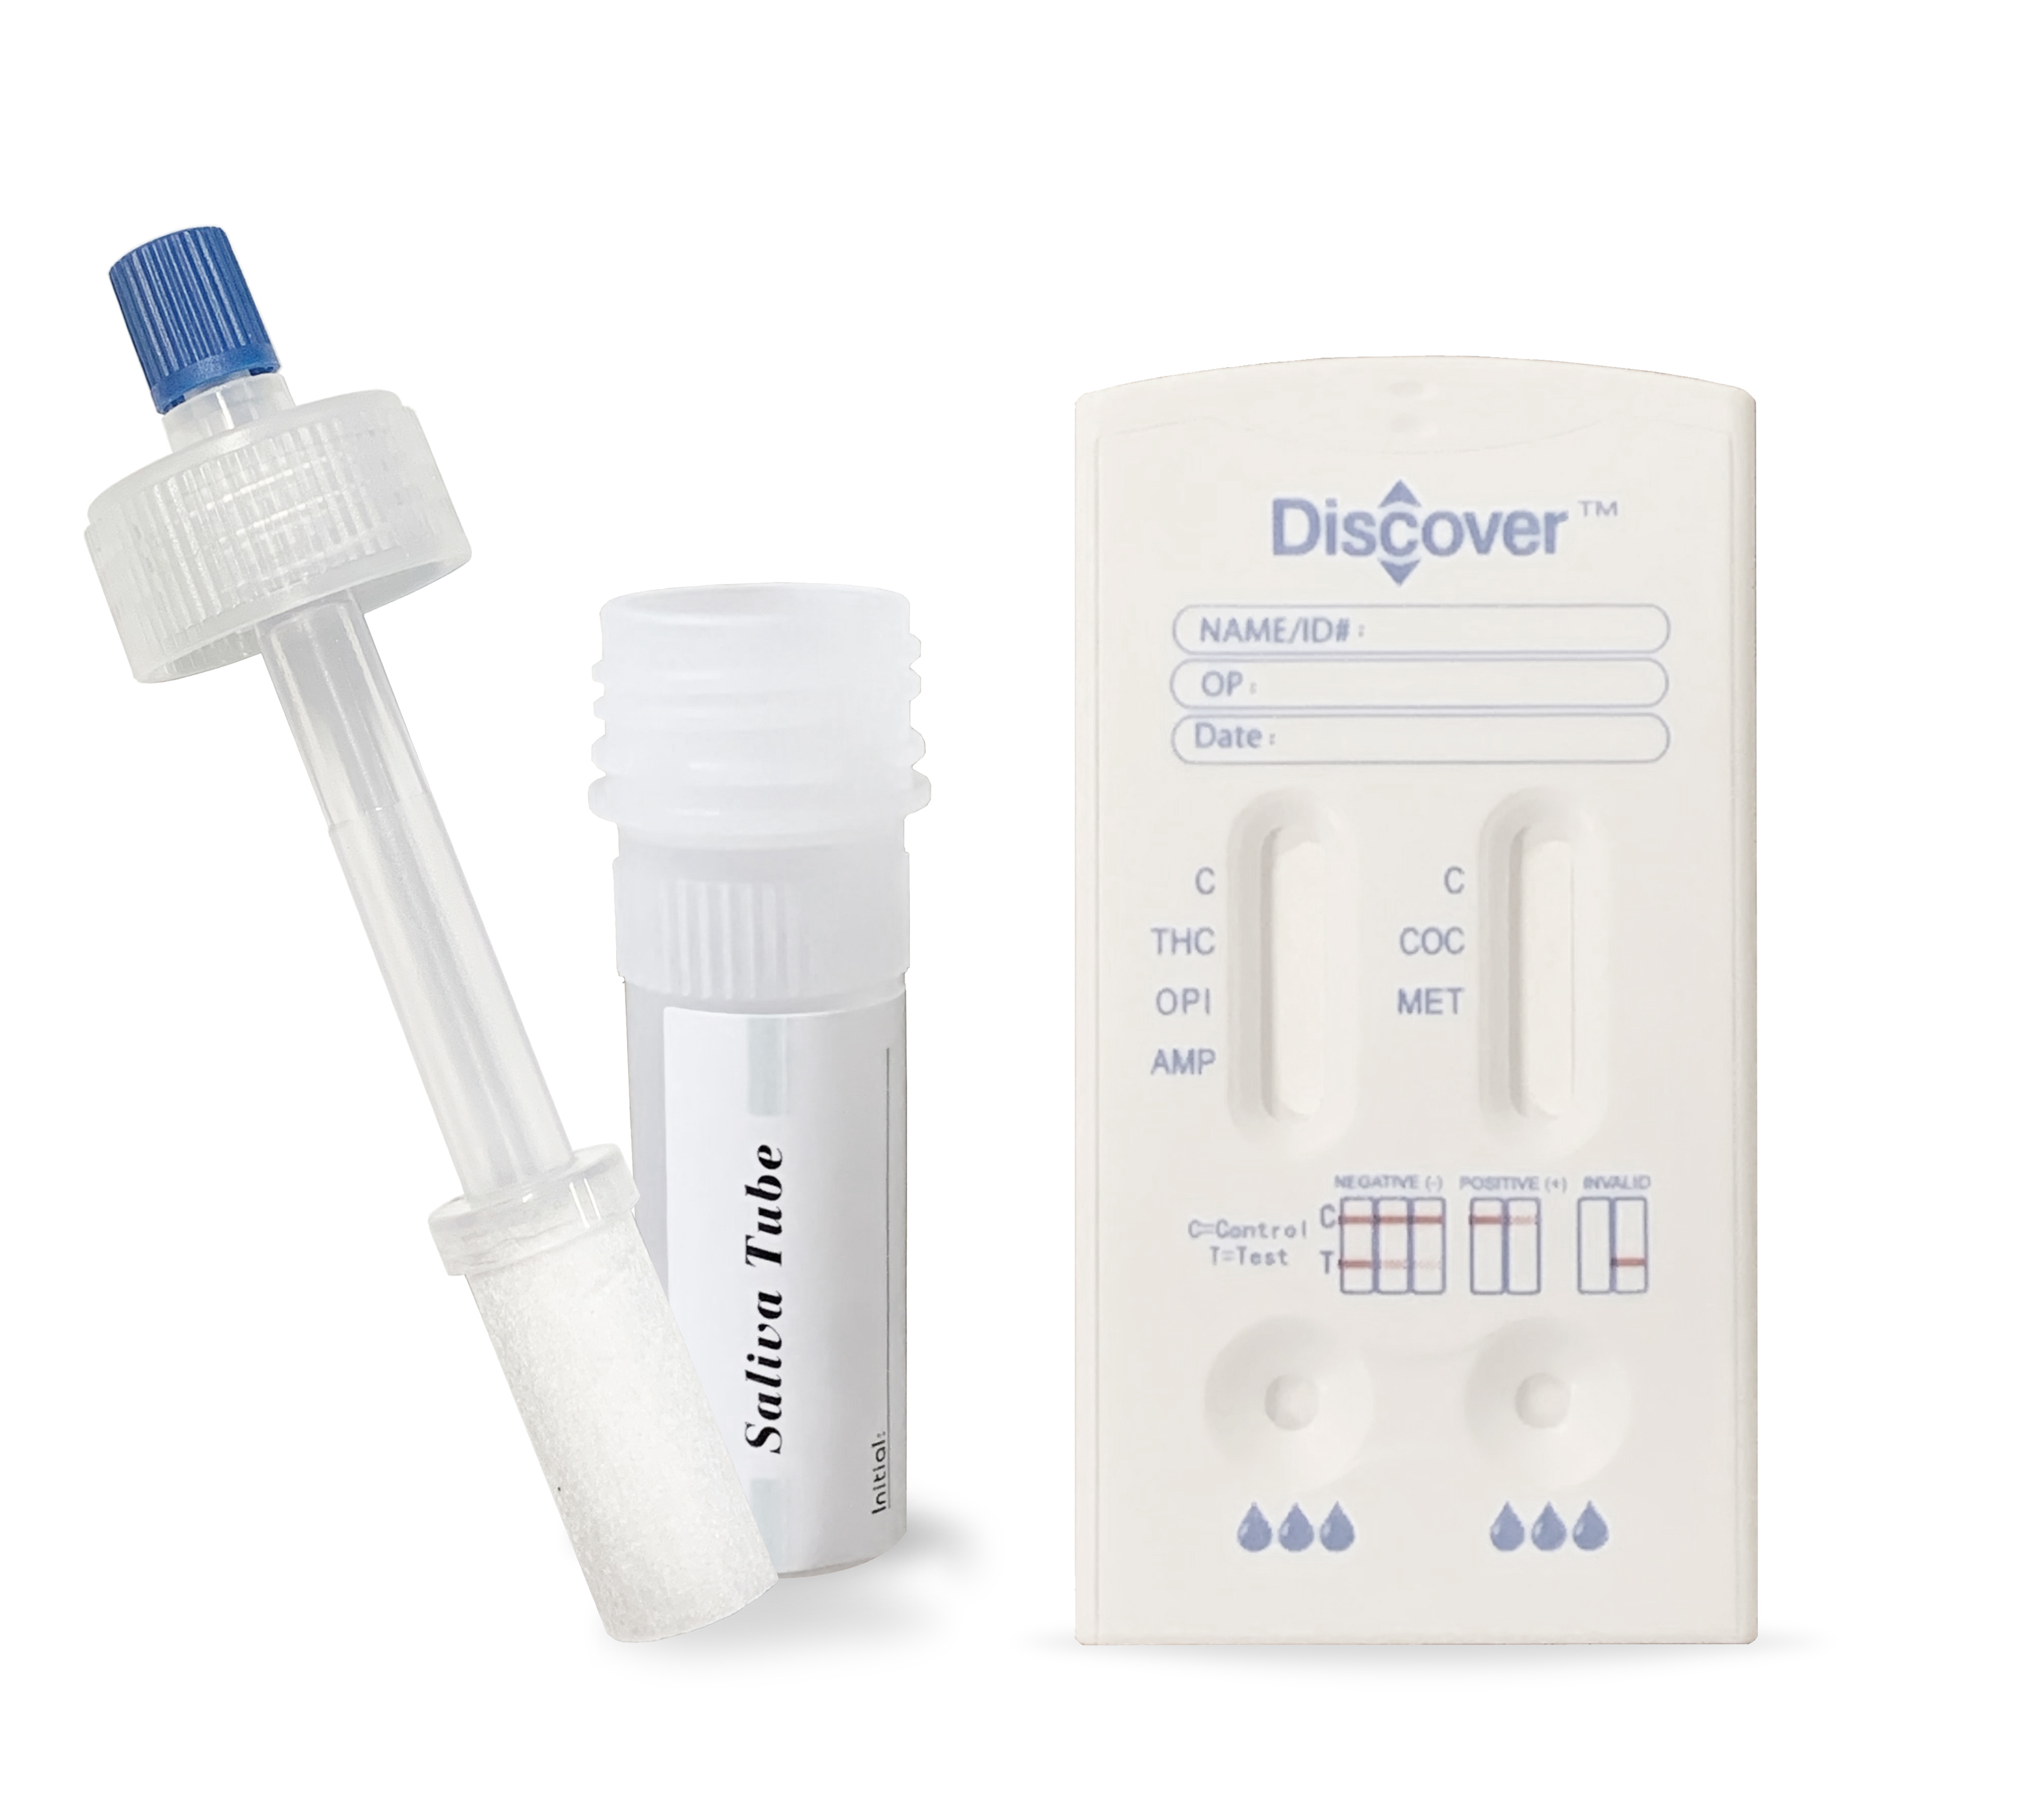 Discover - One-Step - 10-Panel Oral Fluid Cassette <span style='font-size:14px; color:#7d7d7d;'><br>THC/COC/OPI/mAMP/AMP/PCP/BAR/BZO/OXY/BUP </break>